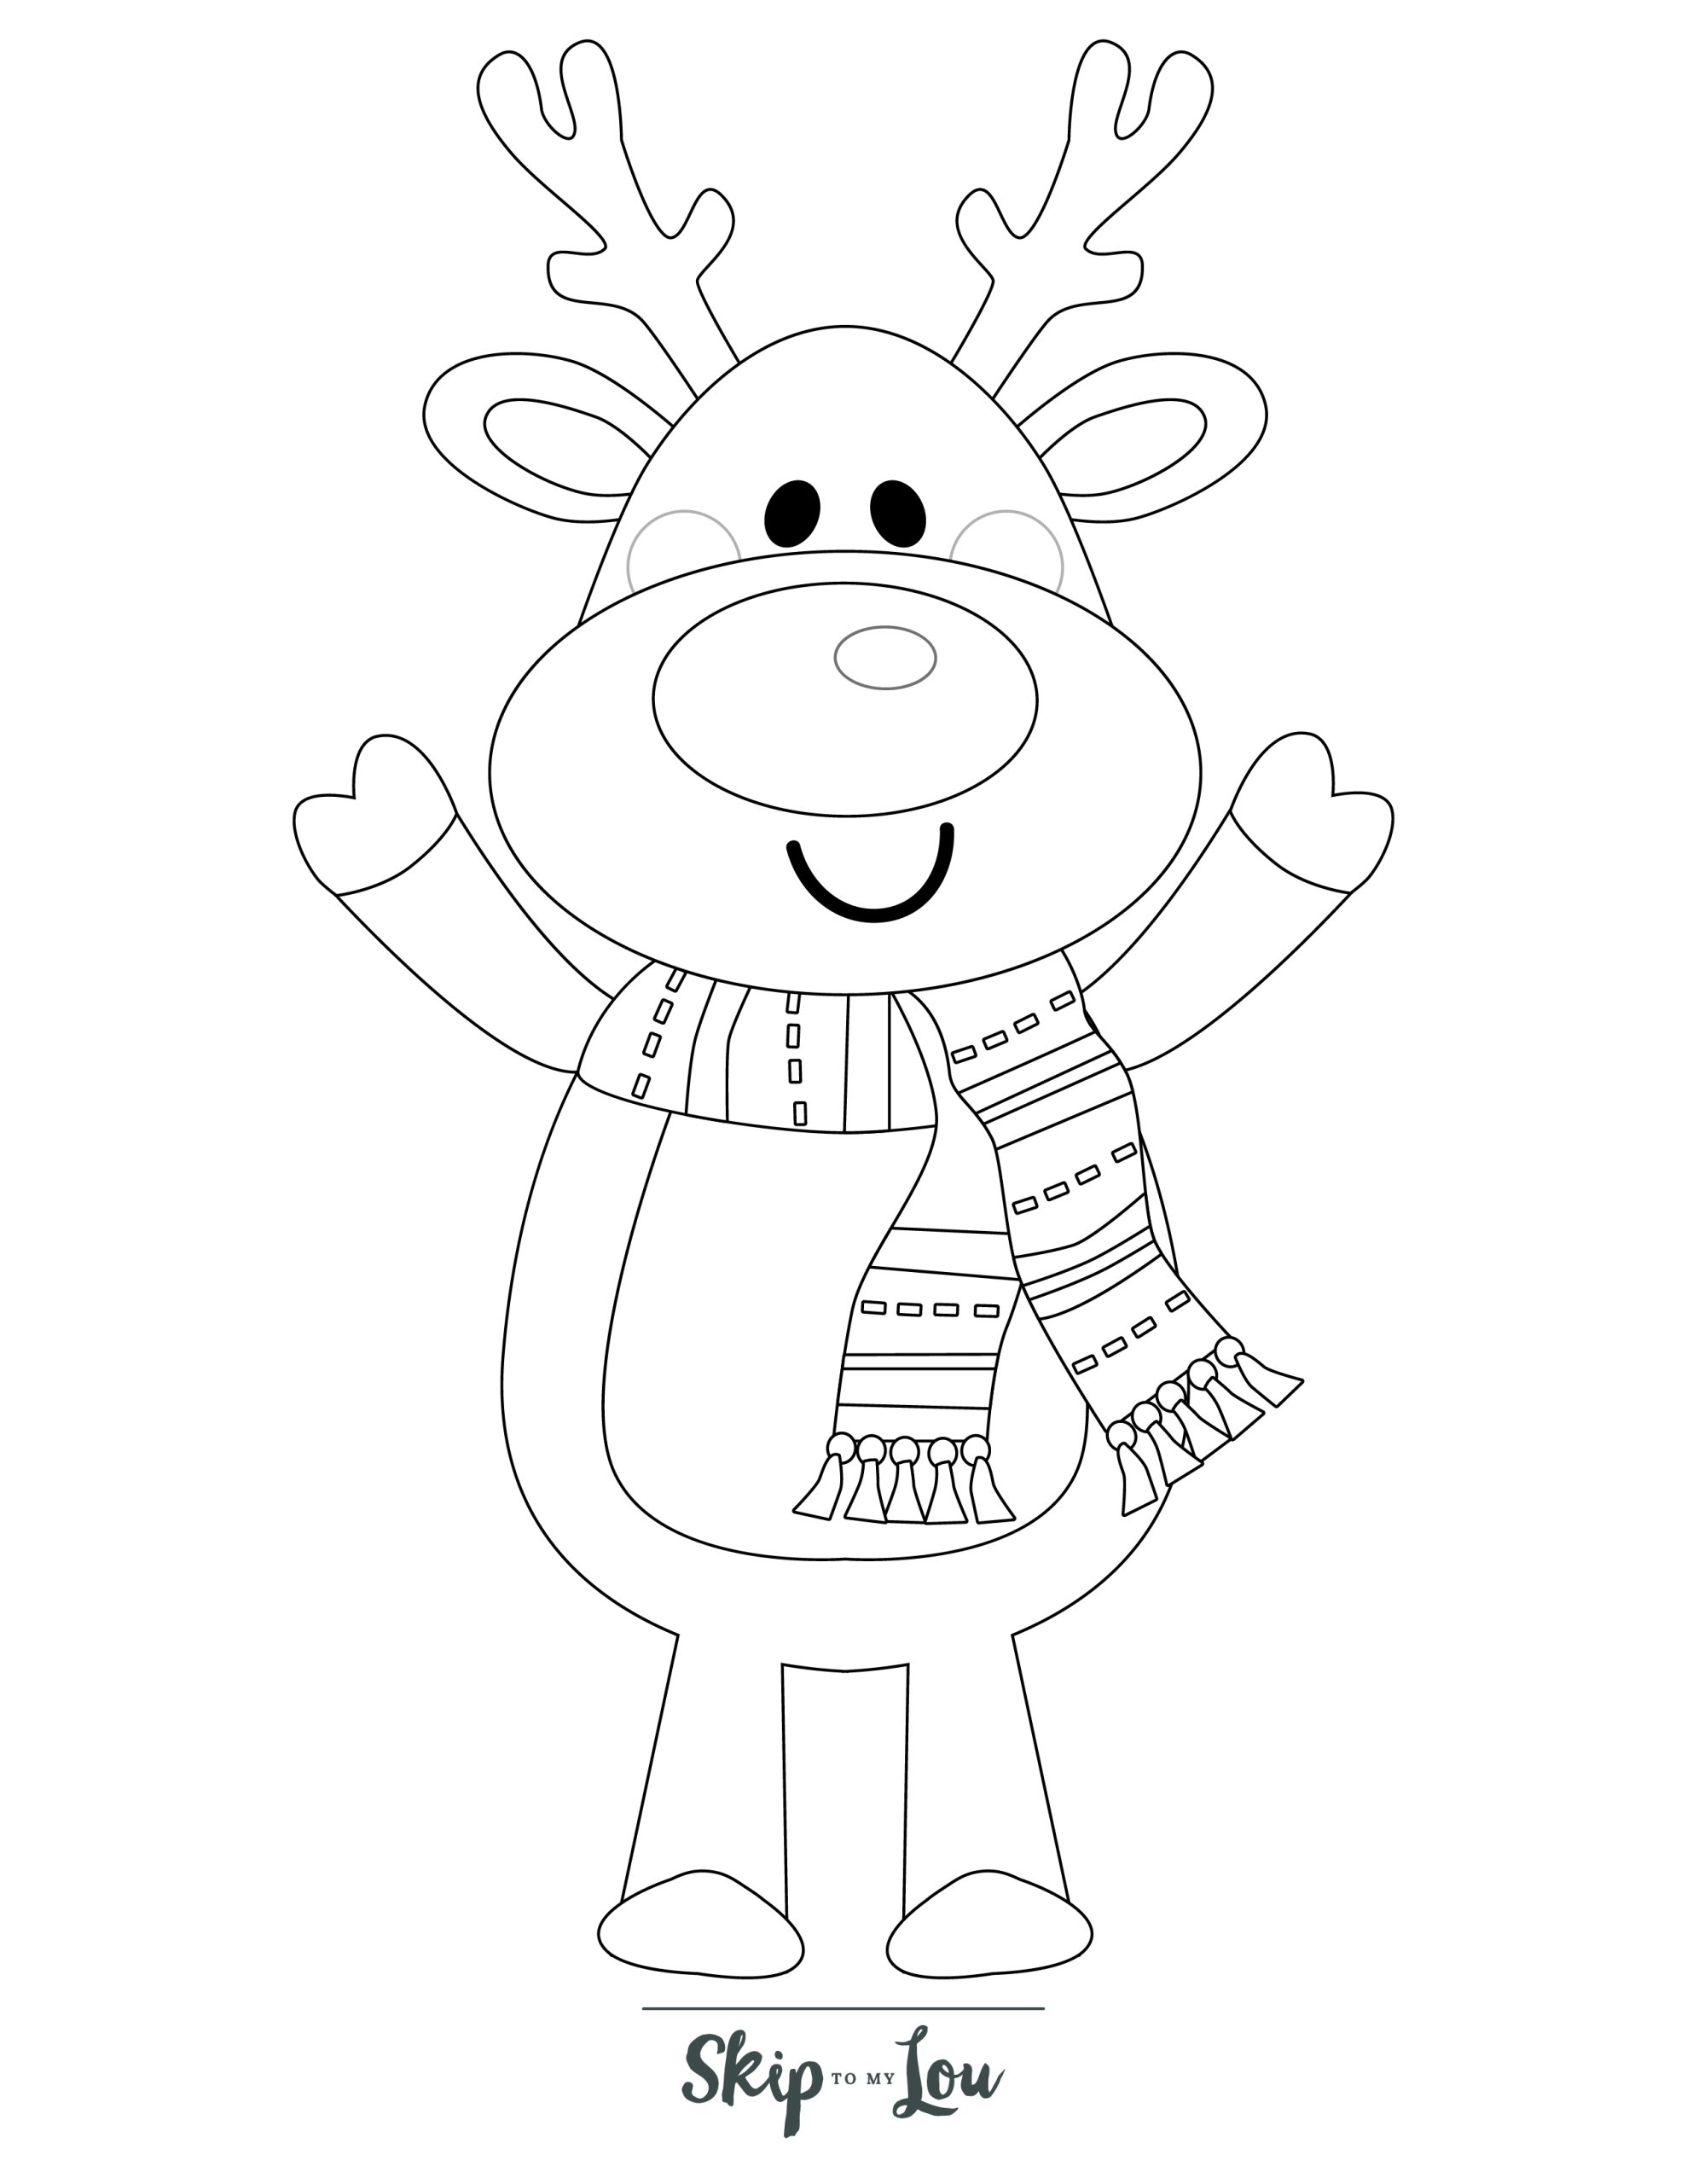 Skip to my Lou - Reindeer Coloring Pages - Line drawing of a happy reindeer standing up and wearing a scarf